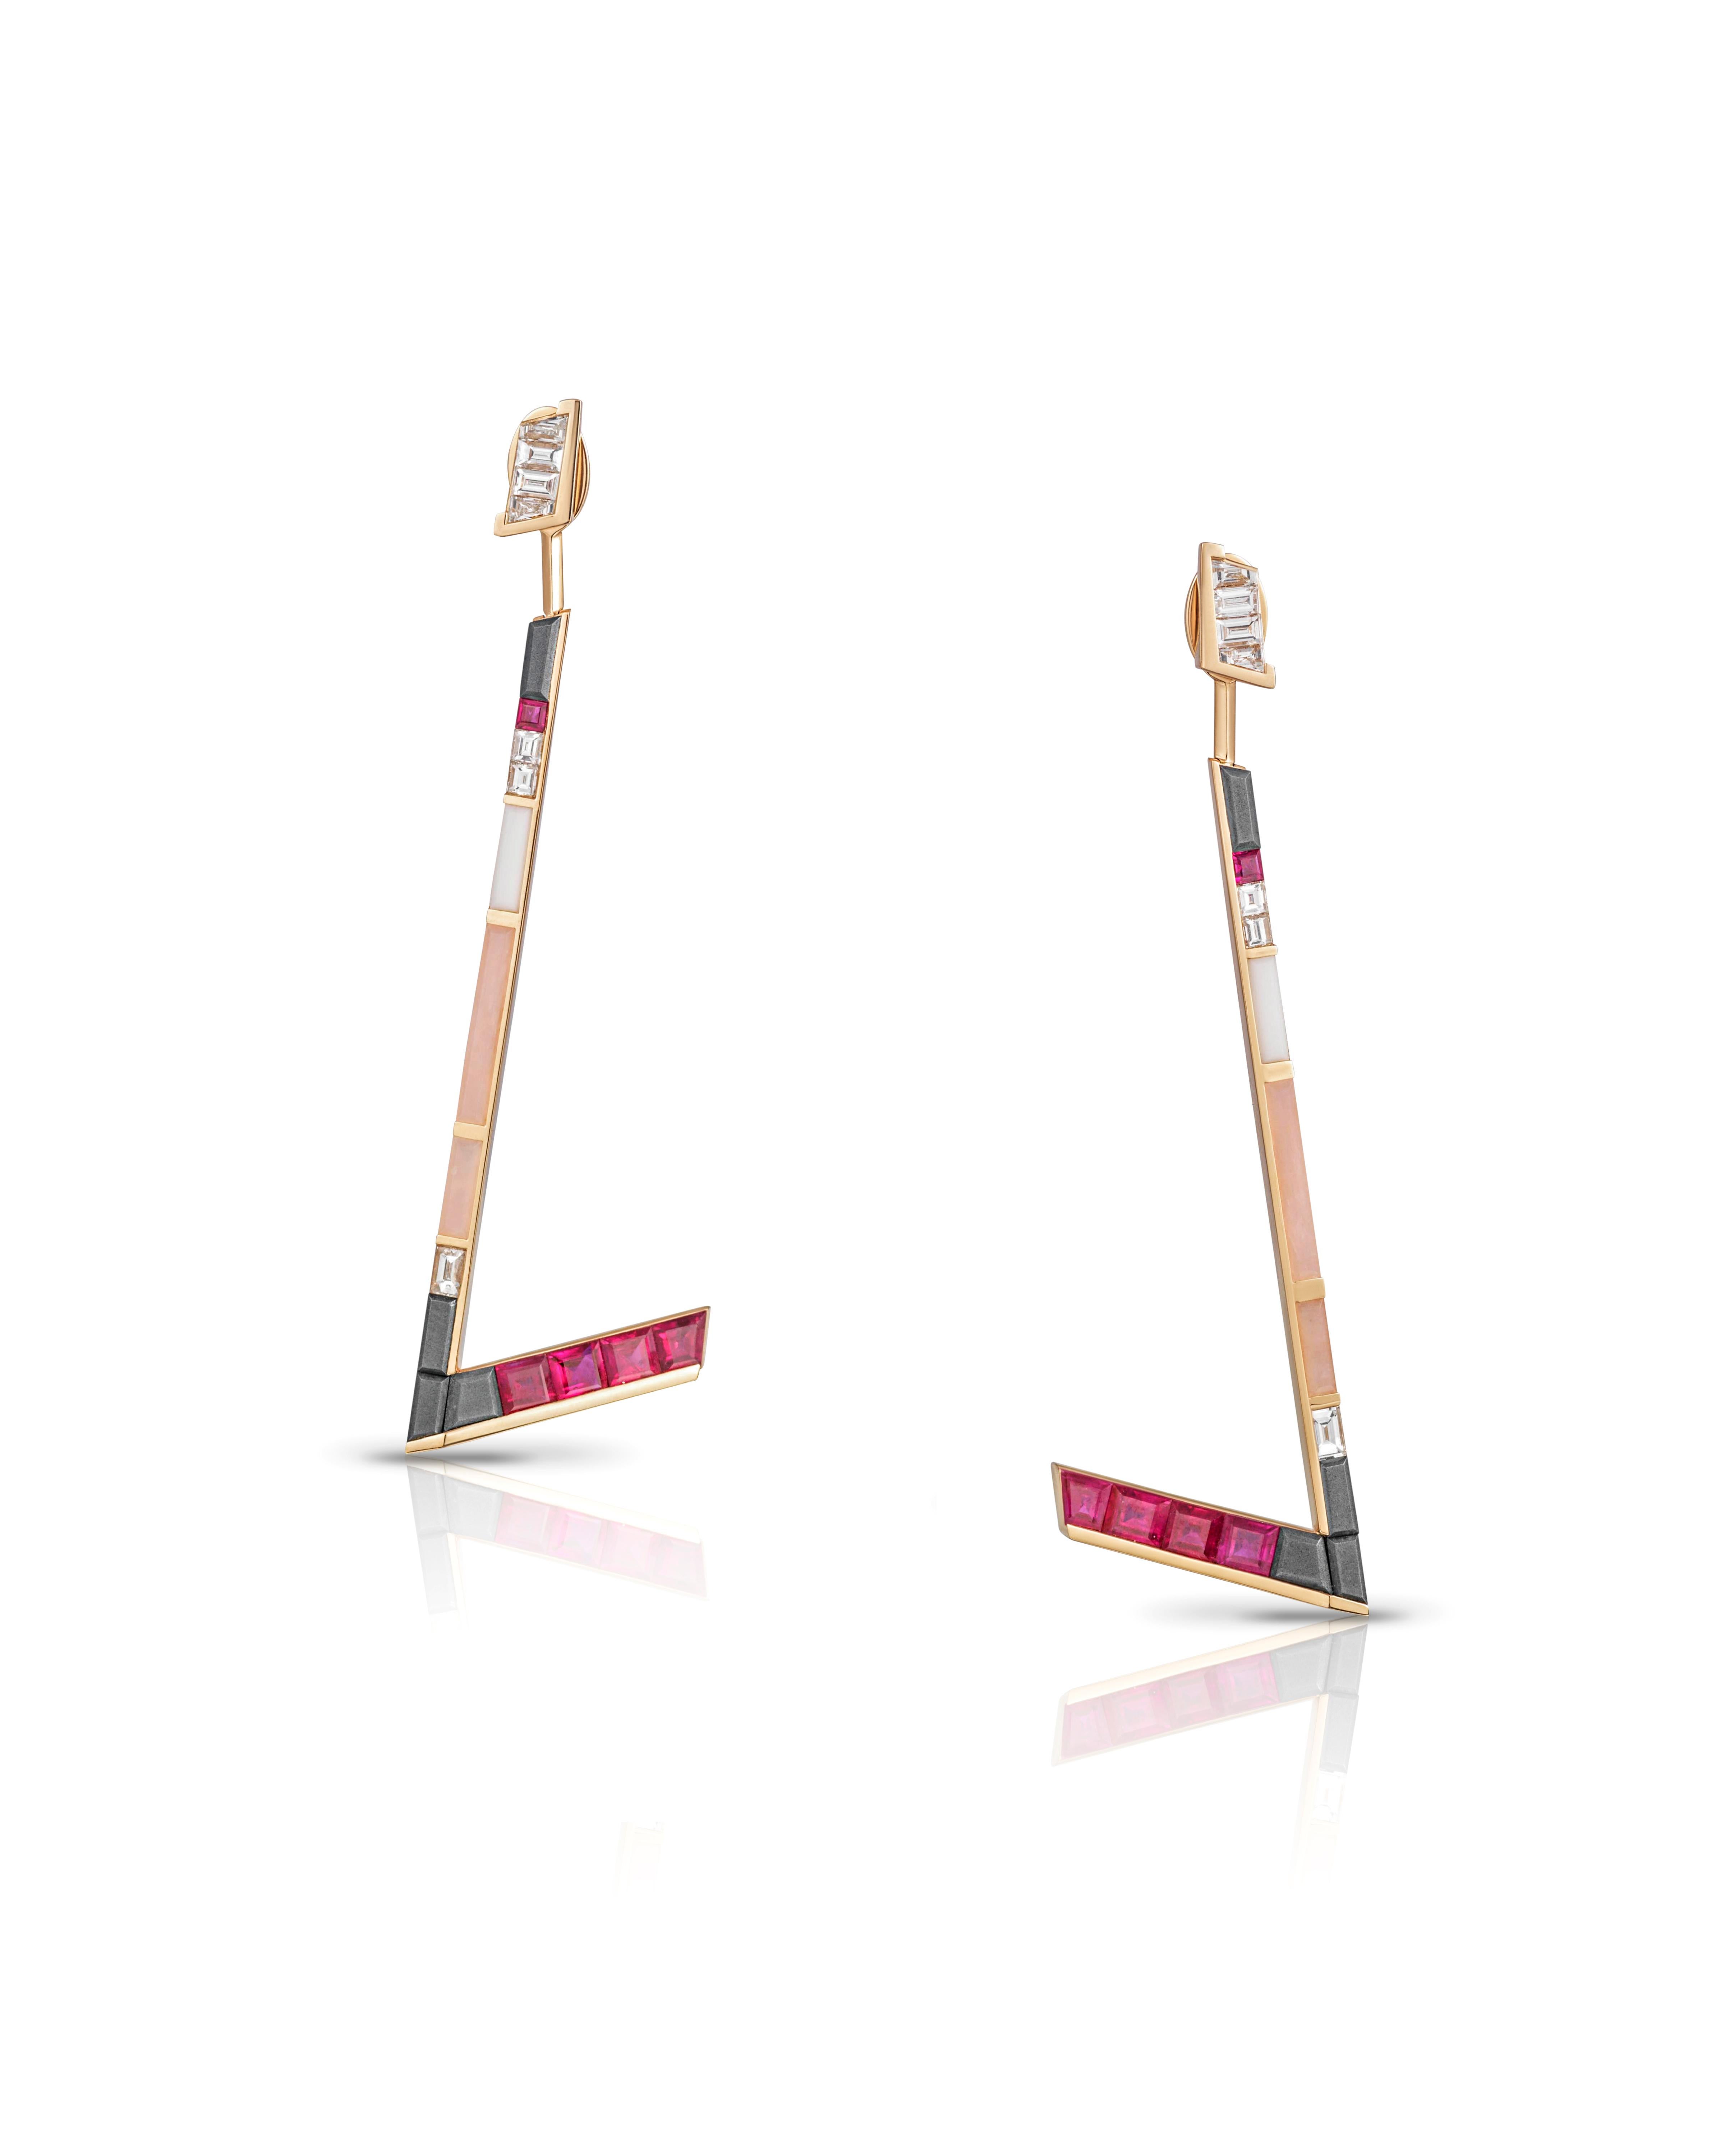 Earrings in 18 Karat Rose Gold set with White Diamonds (o.76 carat), White Agate, Mozambique Rubies, Pink Opal and Hematite Baguettes.

The Stellar Zigzag Earrings have detachable tassels for more versatility. This way the diamond studs can be worn